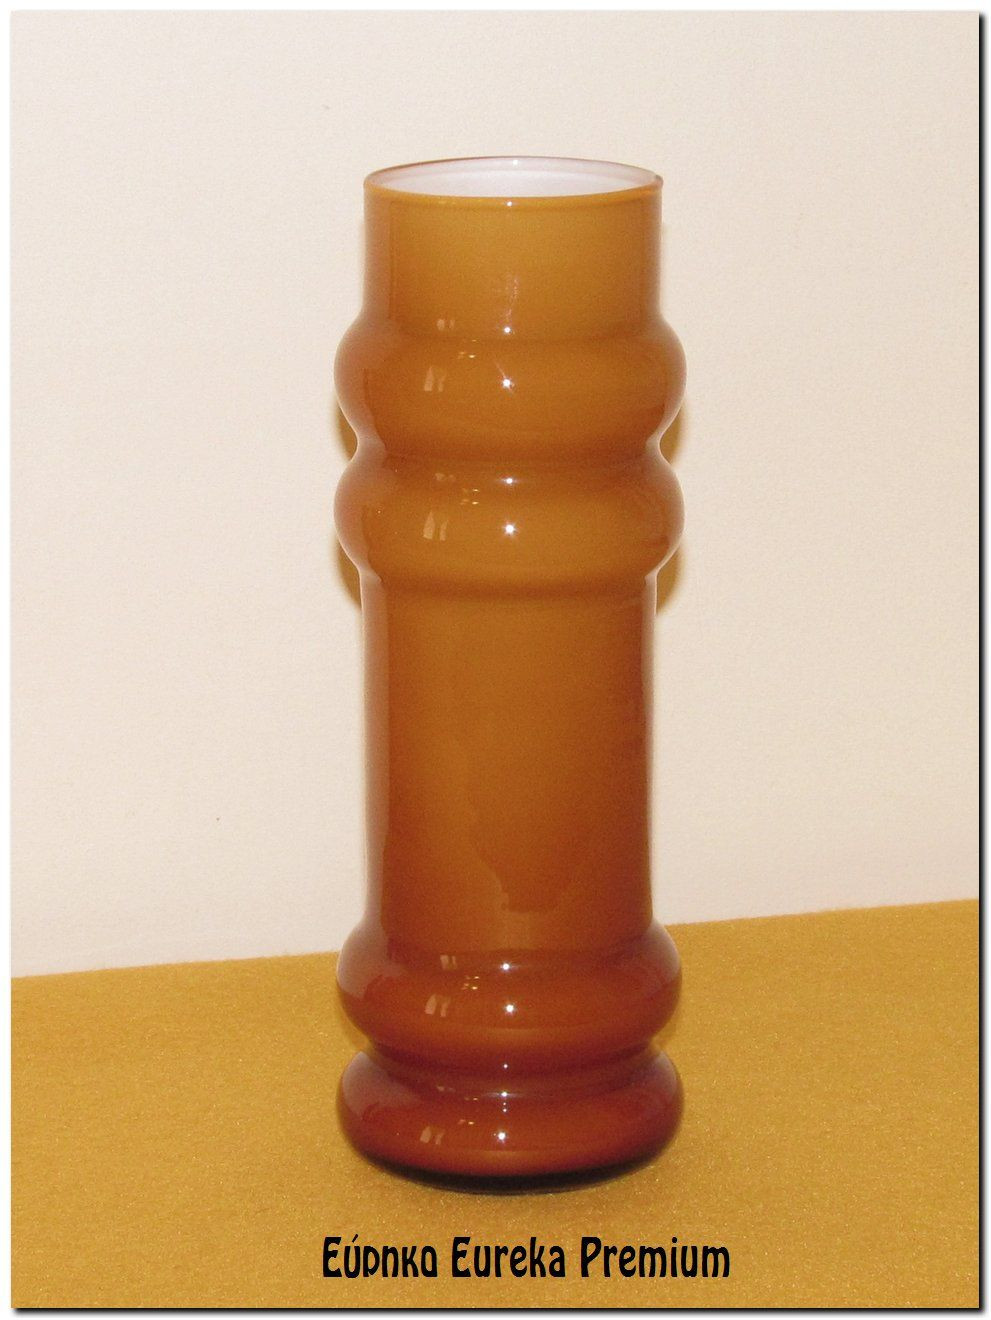 29 Recommended Old Glass Vases 2024 free download old glass vases of vintage cased glass vase in sweet caramel honey color from for vintage cased glass vase in sweet caramel honey color from scandinavia